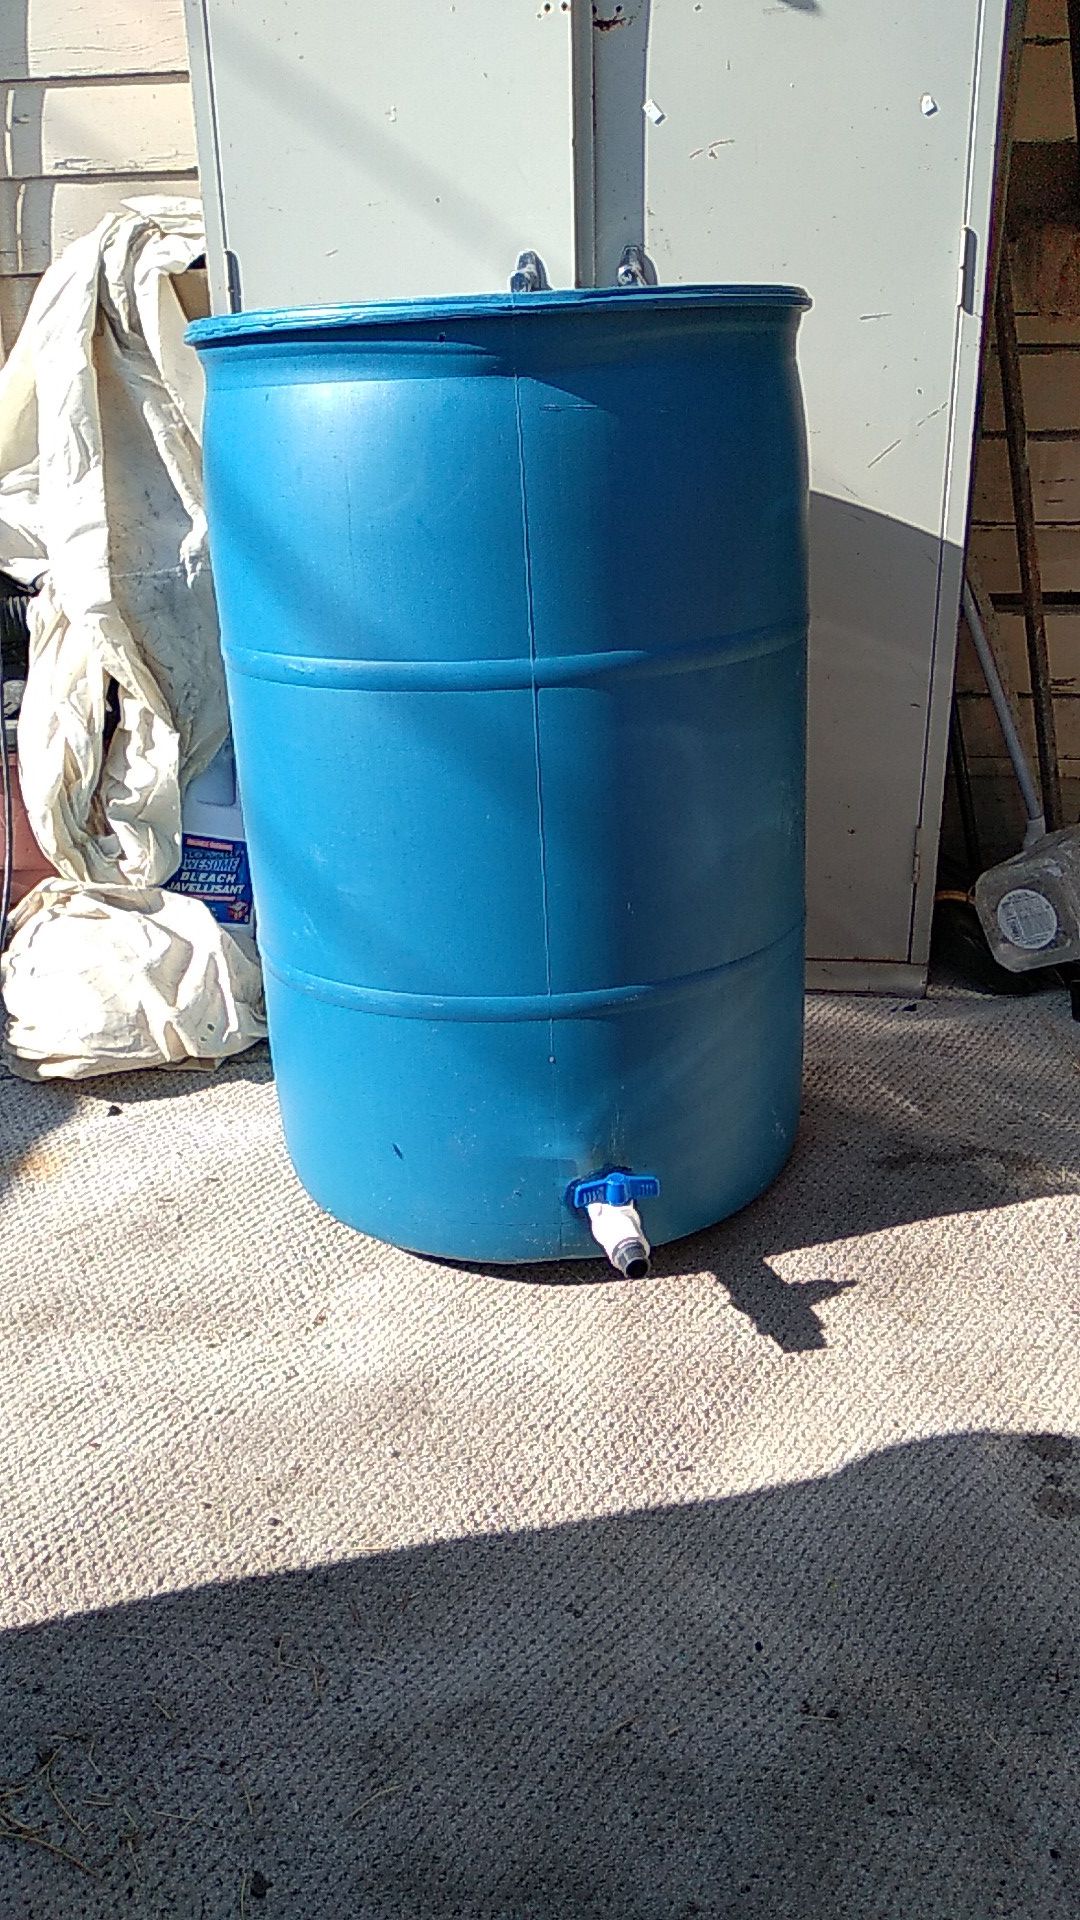 55 gallon water tank with hose spout ready to use [open top]